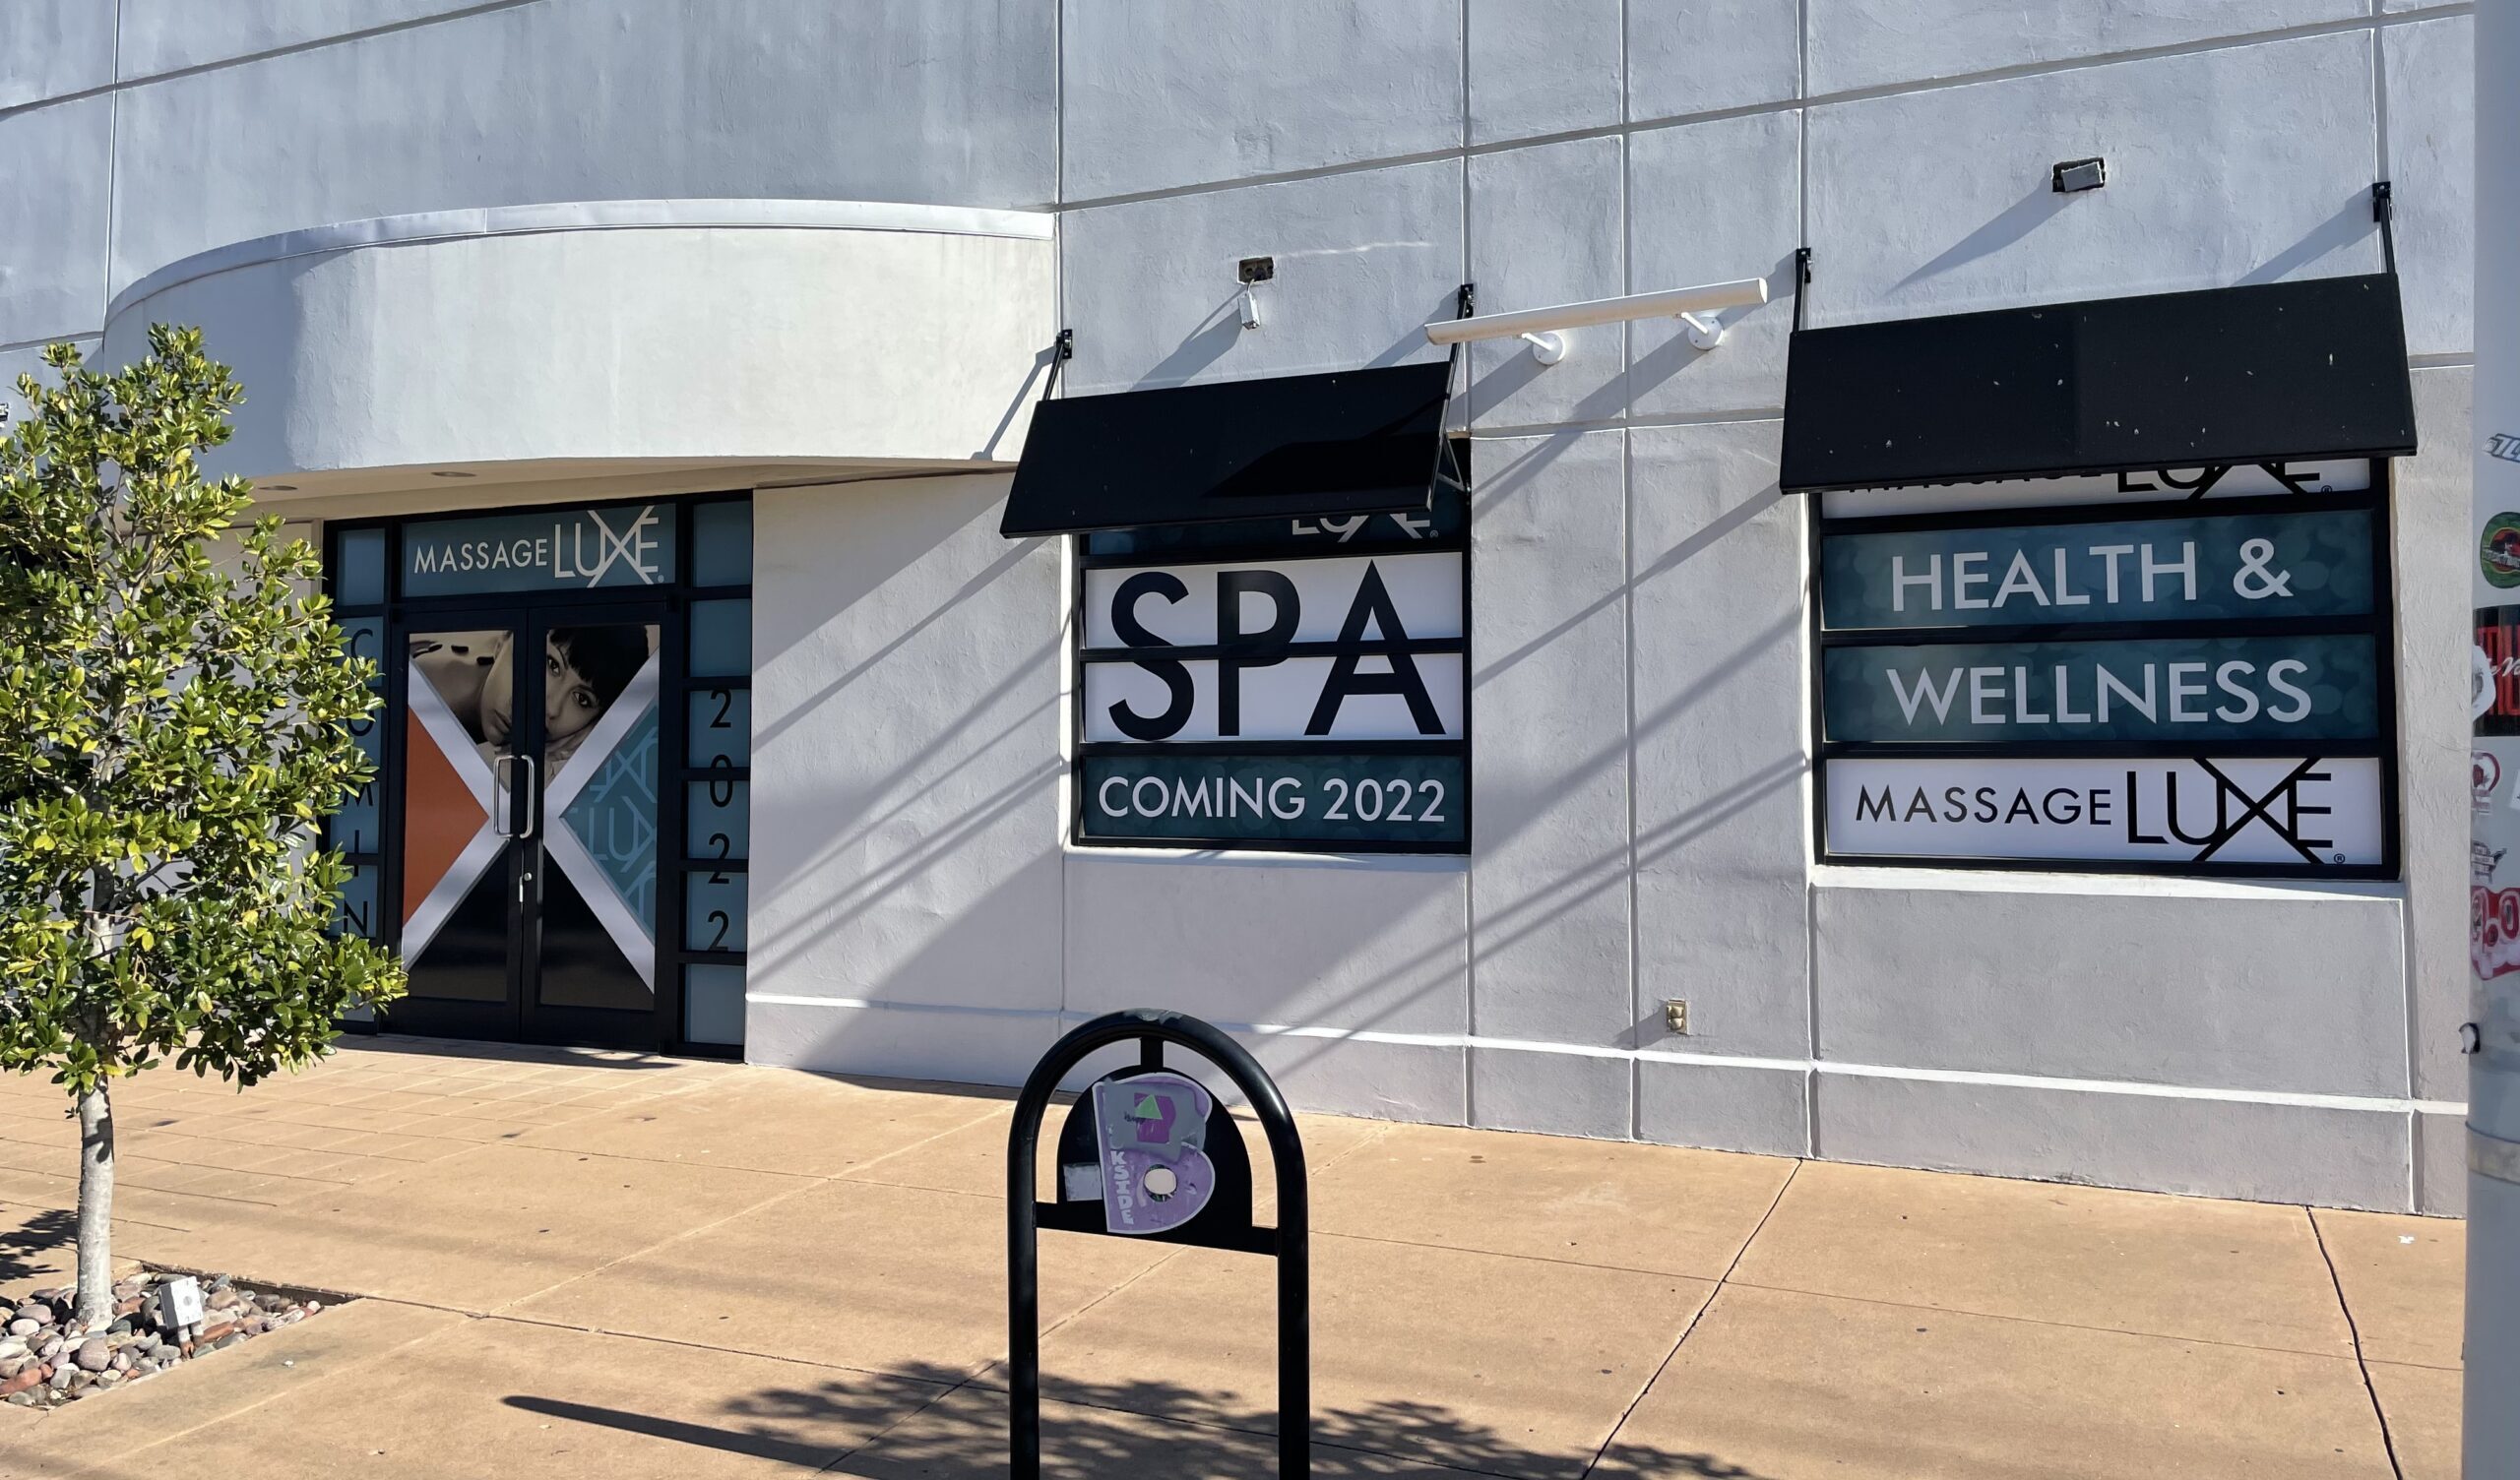 MassageLuXe Continues Rapid Expansion in the South With First Oklahoma Location Opening Soon in Tulsa